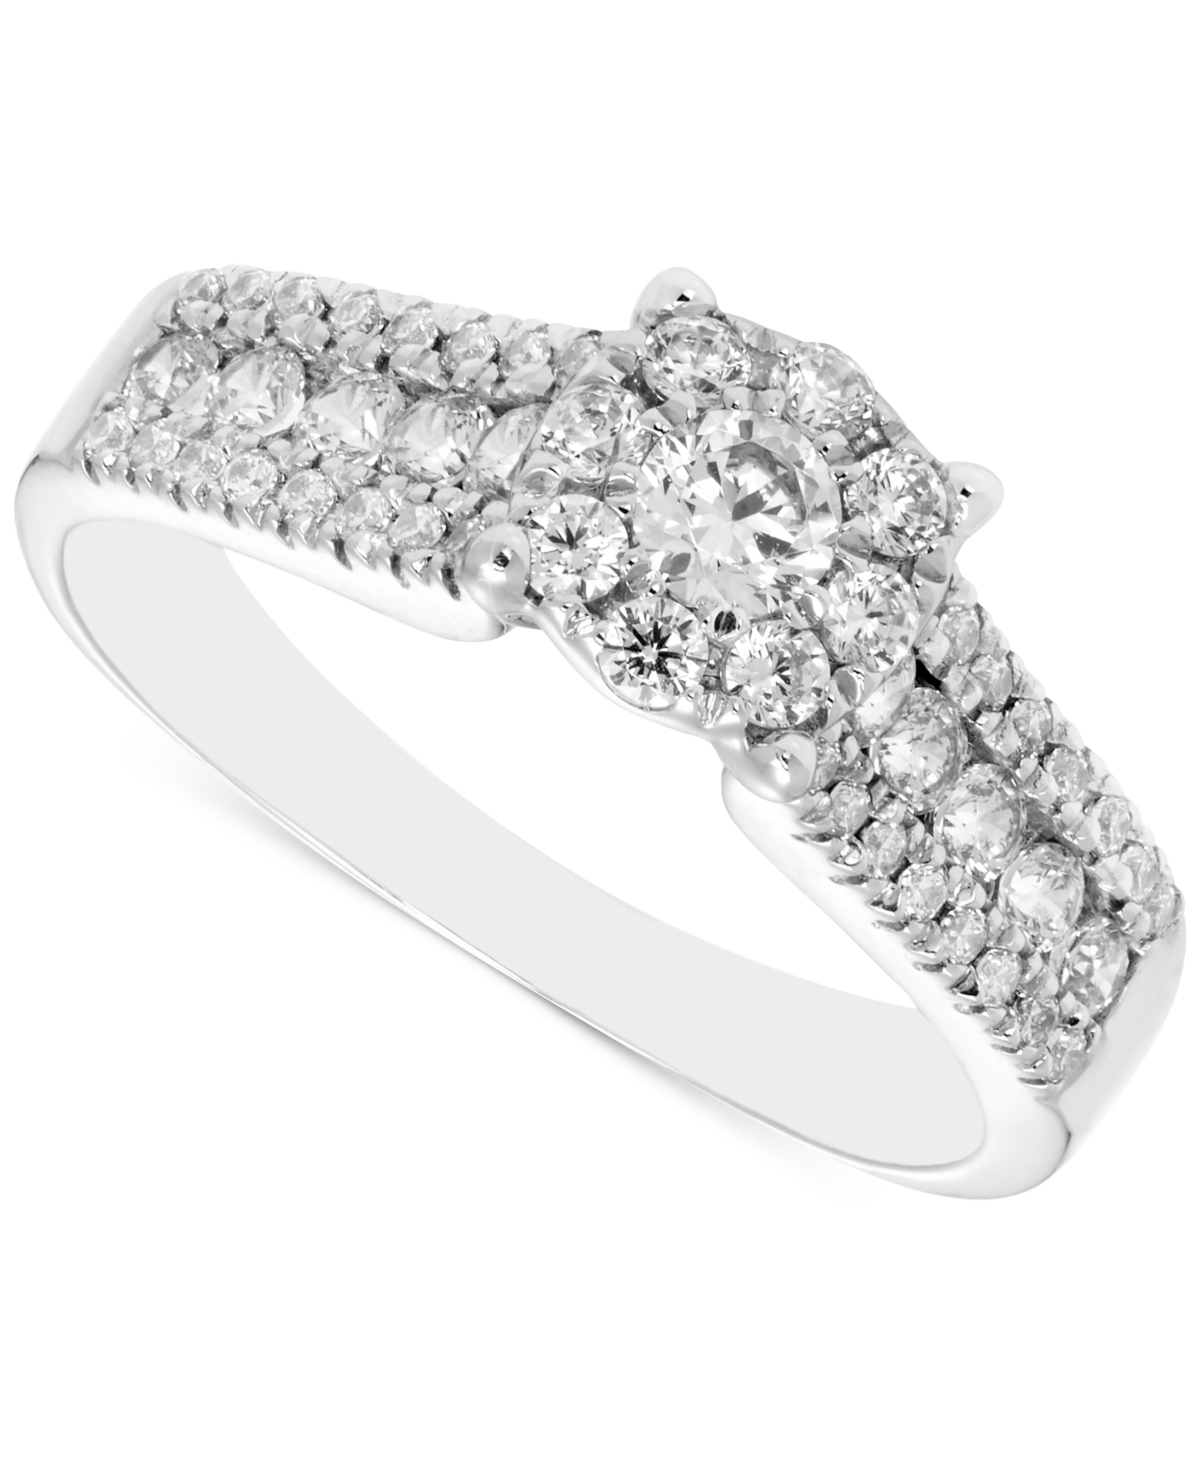 Diamond Halo Engagement Ring (3/4 ct. t.w.) in 14k White Gold - White Gold